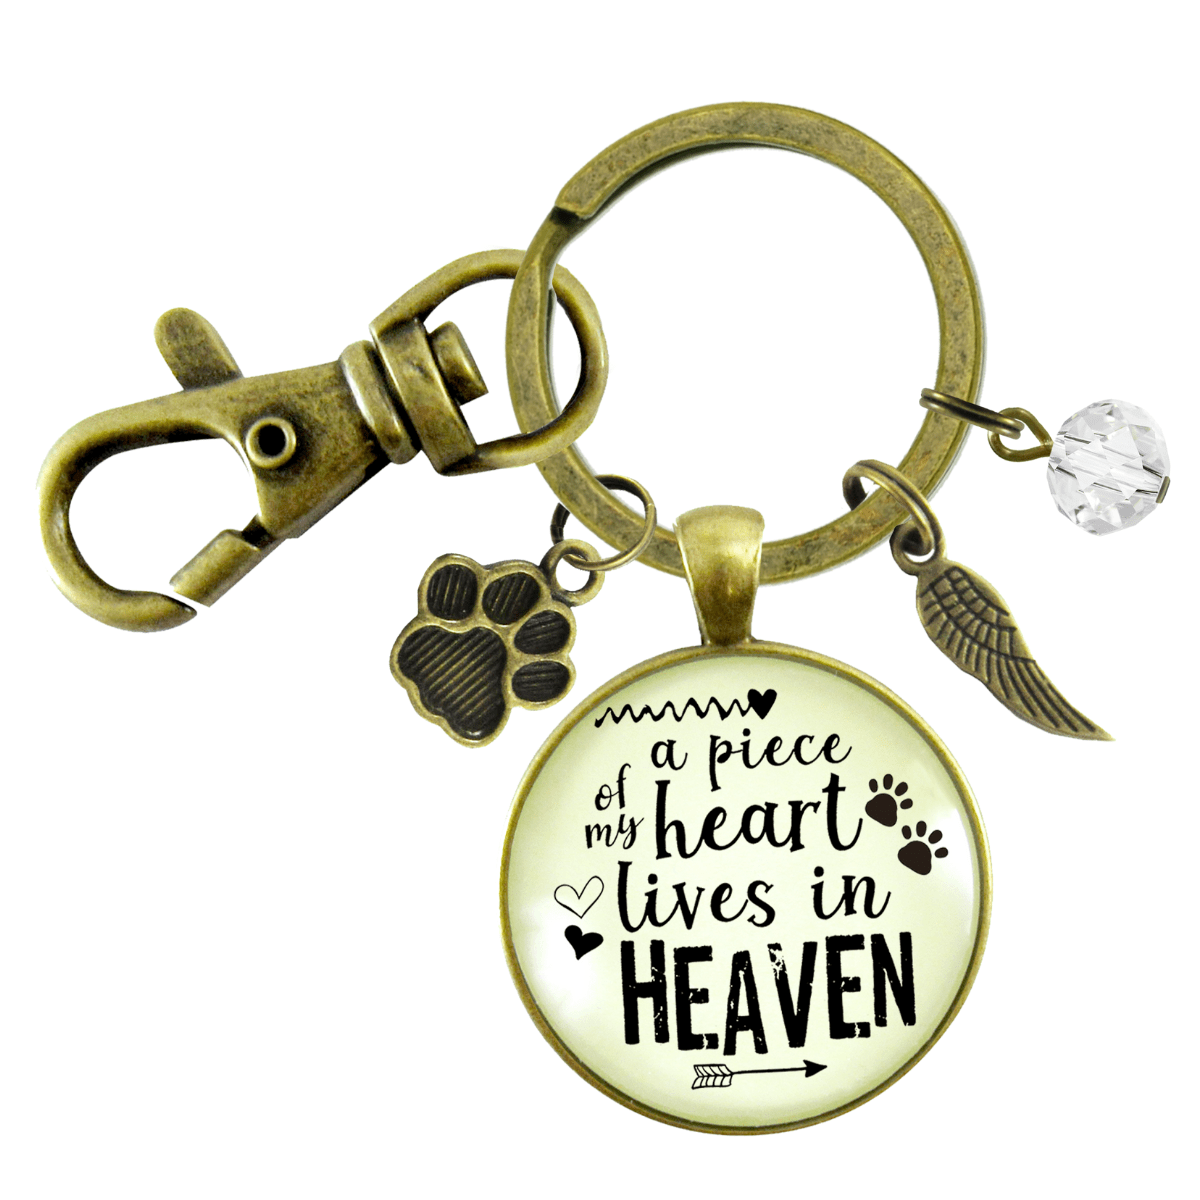 Pet Memorial Keychain A Piece Of My Heart Gift Angel Wing Paw Cat Dog Remembrance Jewelry - Gutsy Goodness Handmade Jewelry;Pet Memorial Keychain A Piece Of My Heart Gift Angel Wing Paw Cat Dog Remembrance Jewelry - Gutsy Goodness Handmade Jewelry Gifts